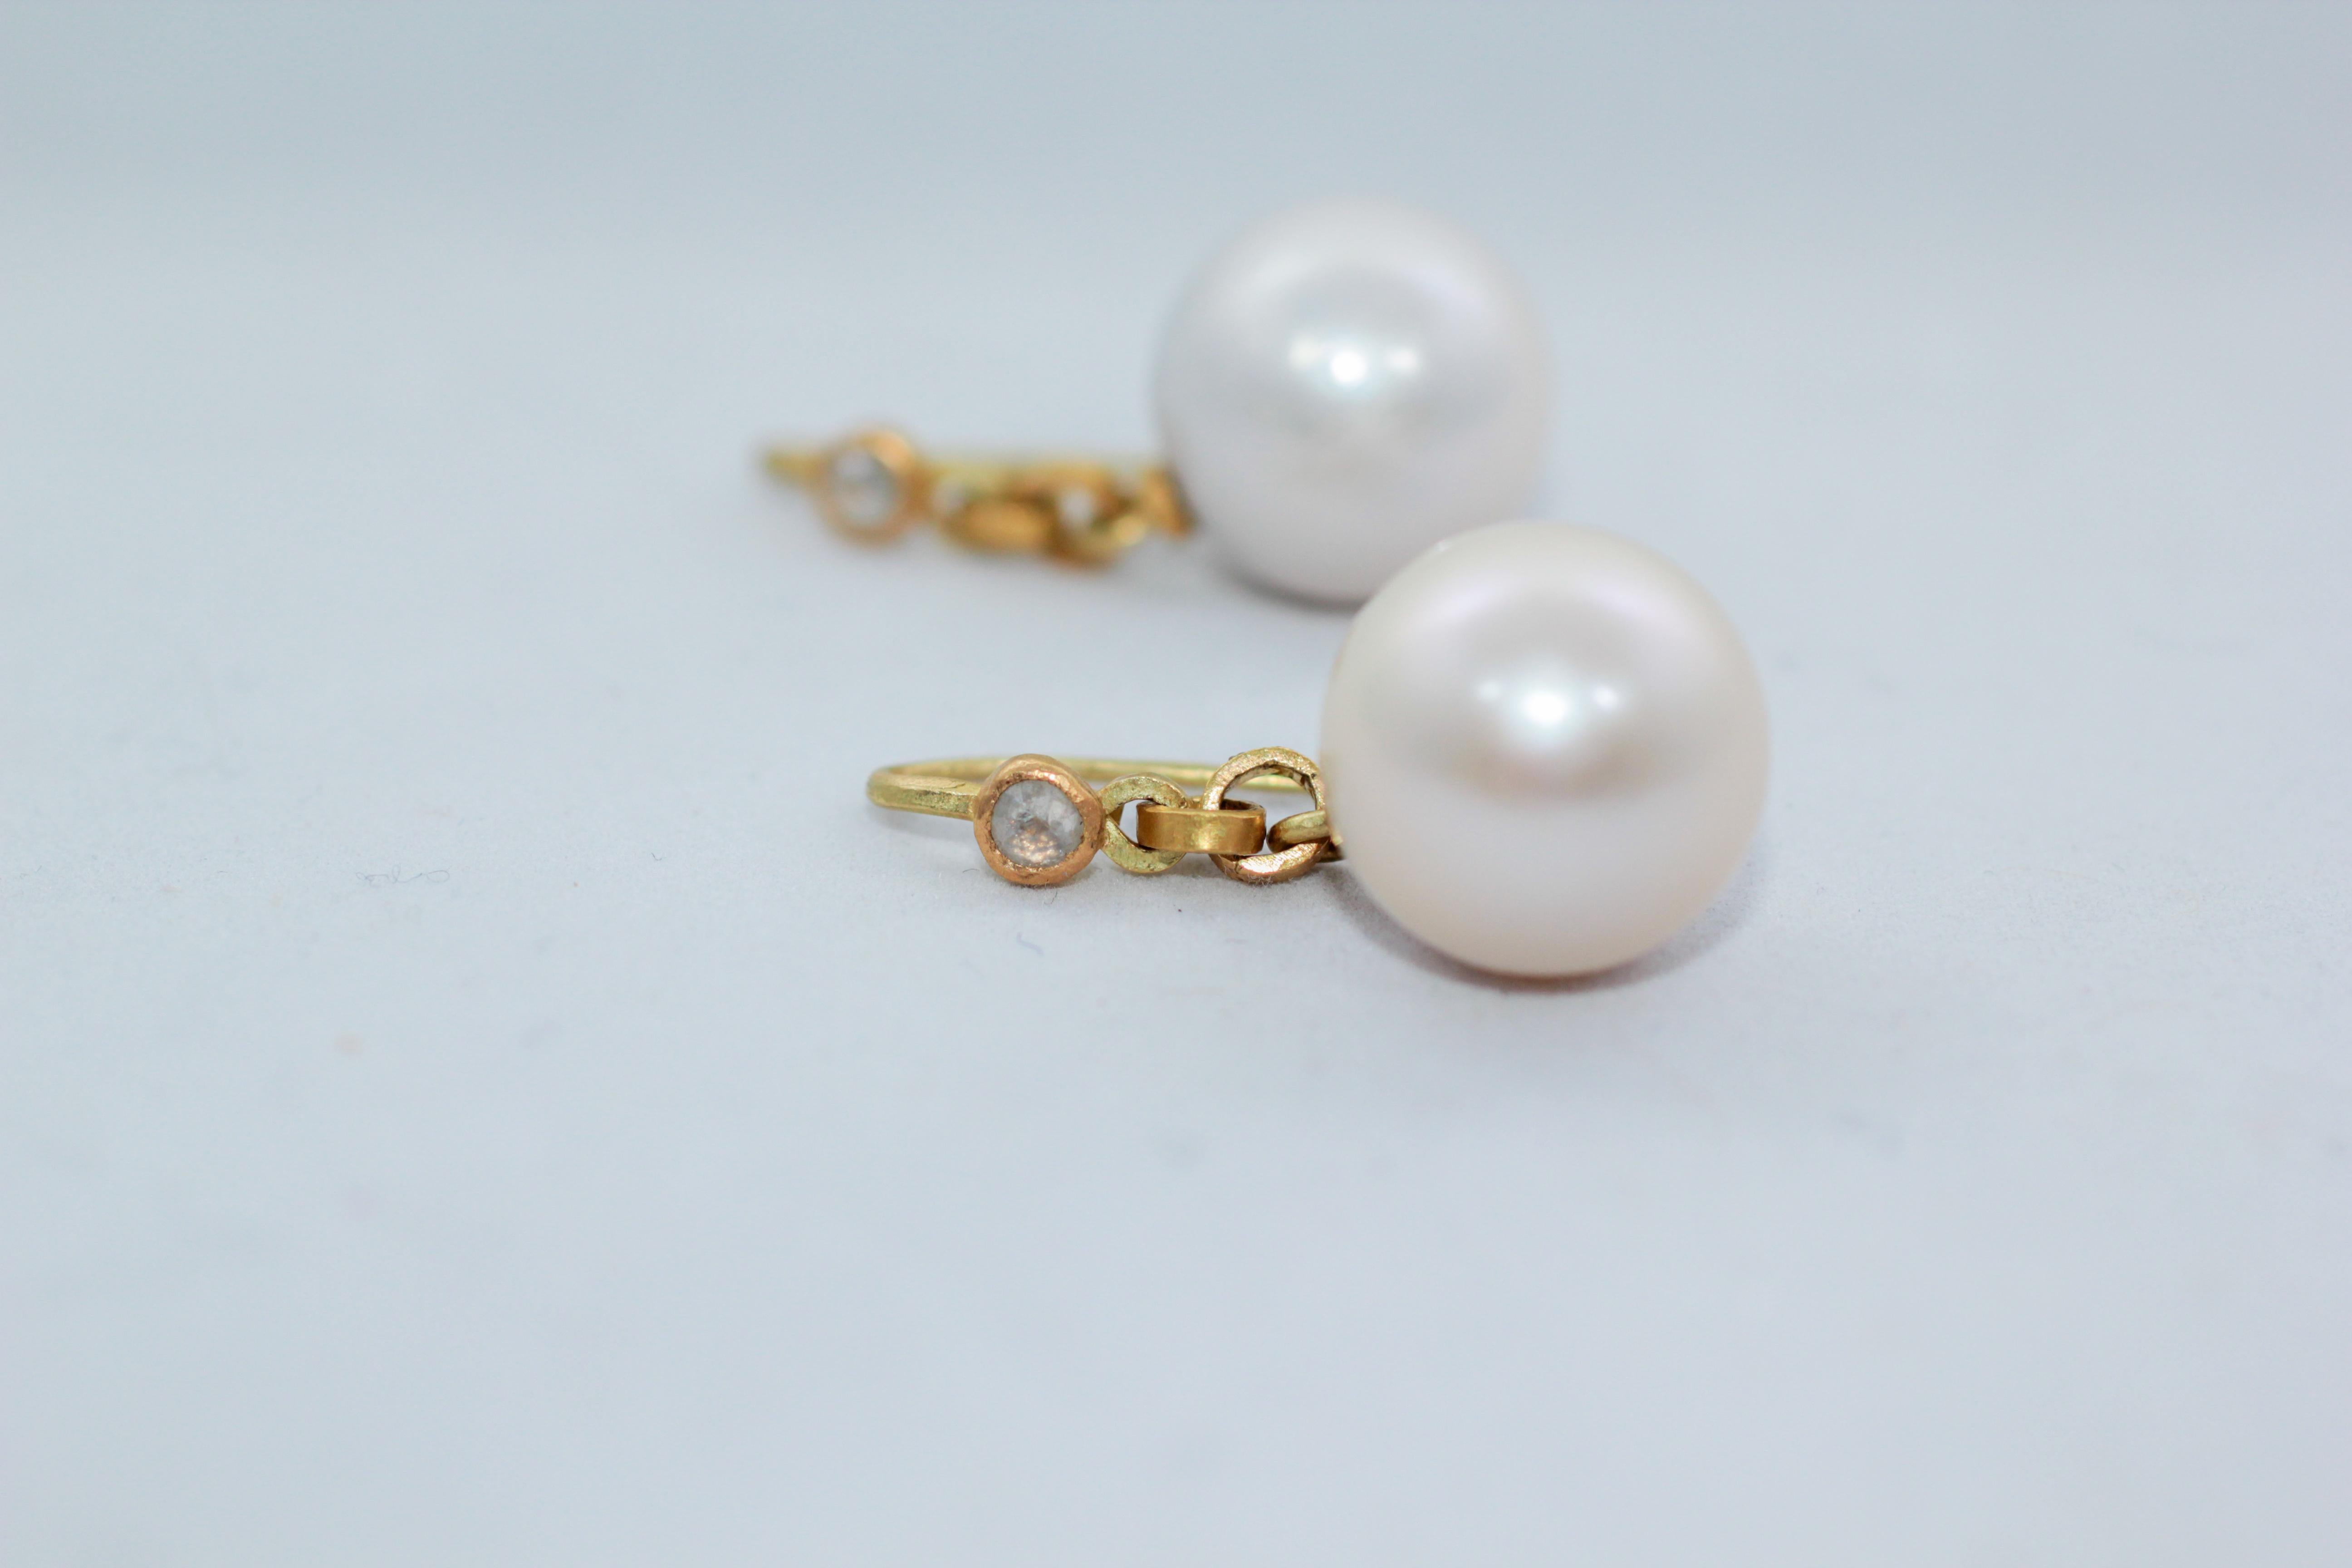 Custom order. Daylight Drop Earrings. These 21K gold elegant contemporary dangle earrings are an update to an all-time classic. Nature's marvel, a large 16mm South Sea Pearl is highlighted by rose-cut white diamonds and a small spray of sparkly pink